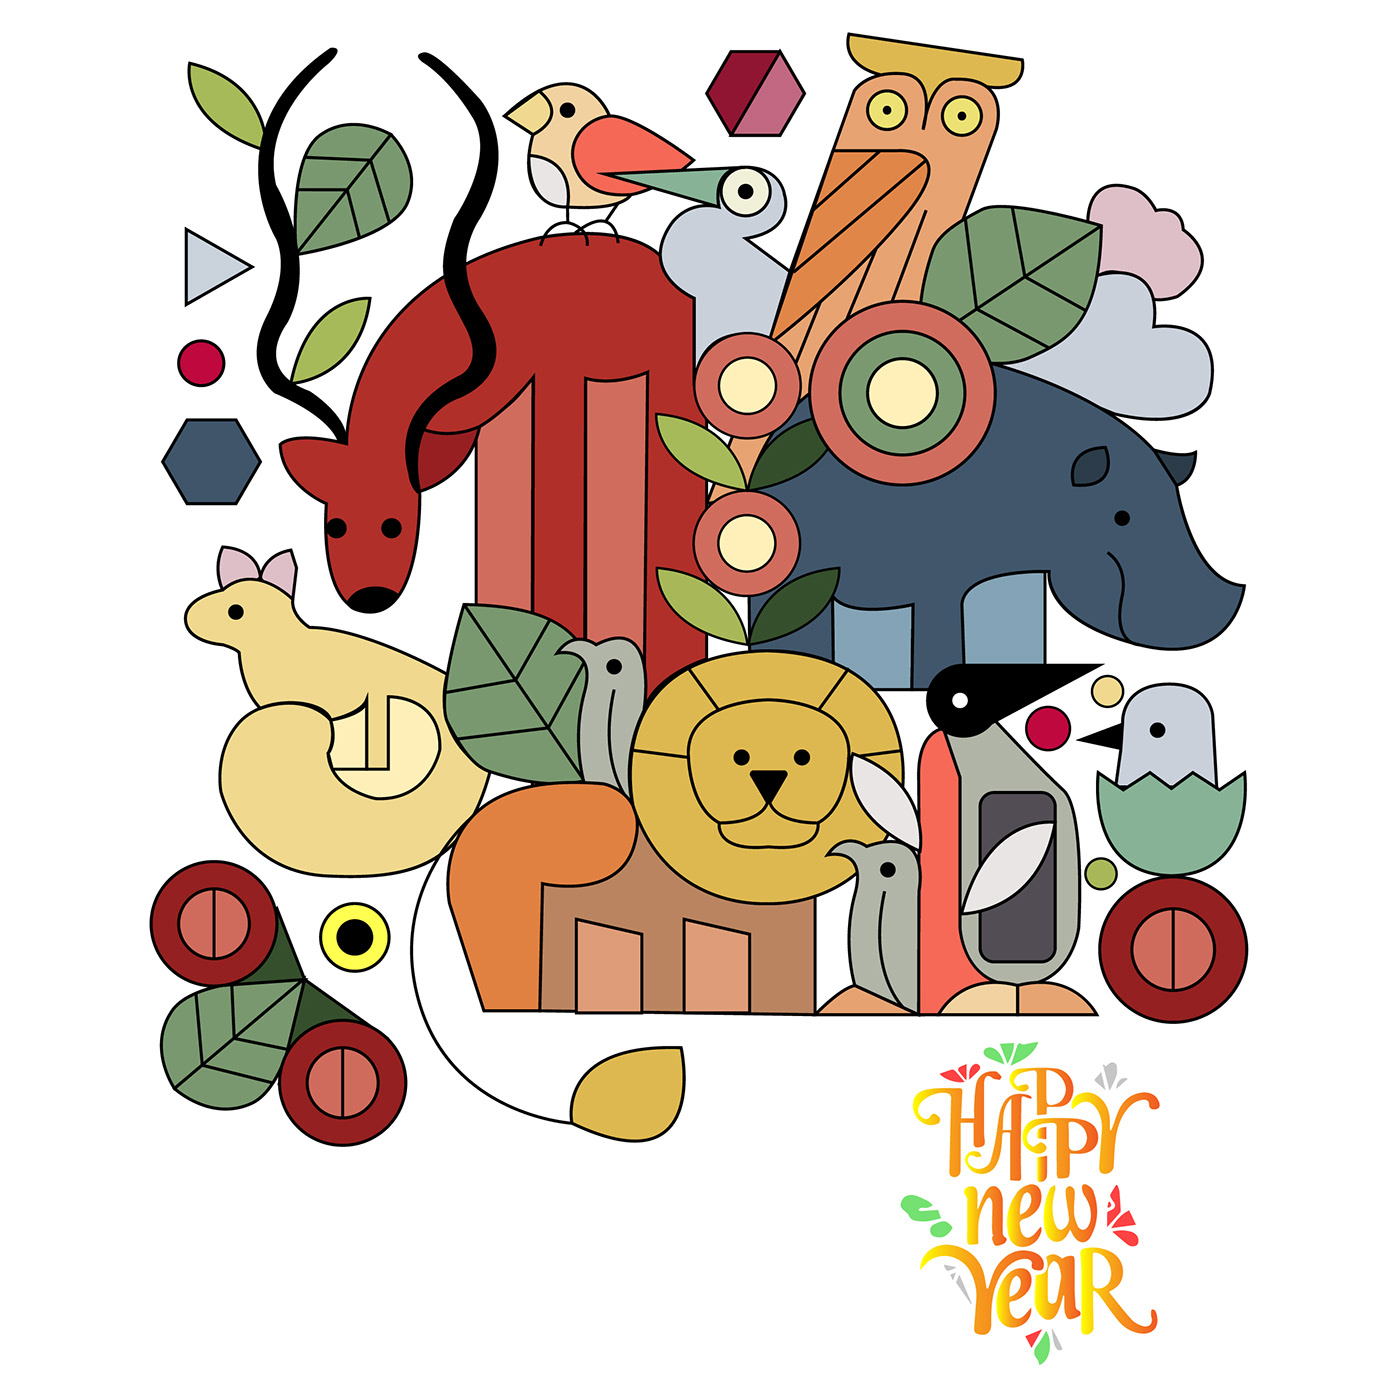 happy new year new year animations gifs gift card animals january graphic design  ILLUSTRATION  art style